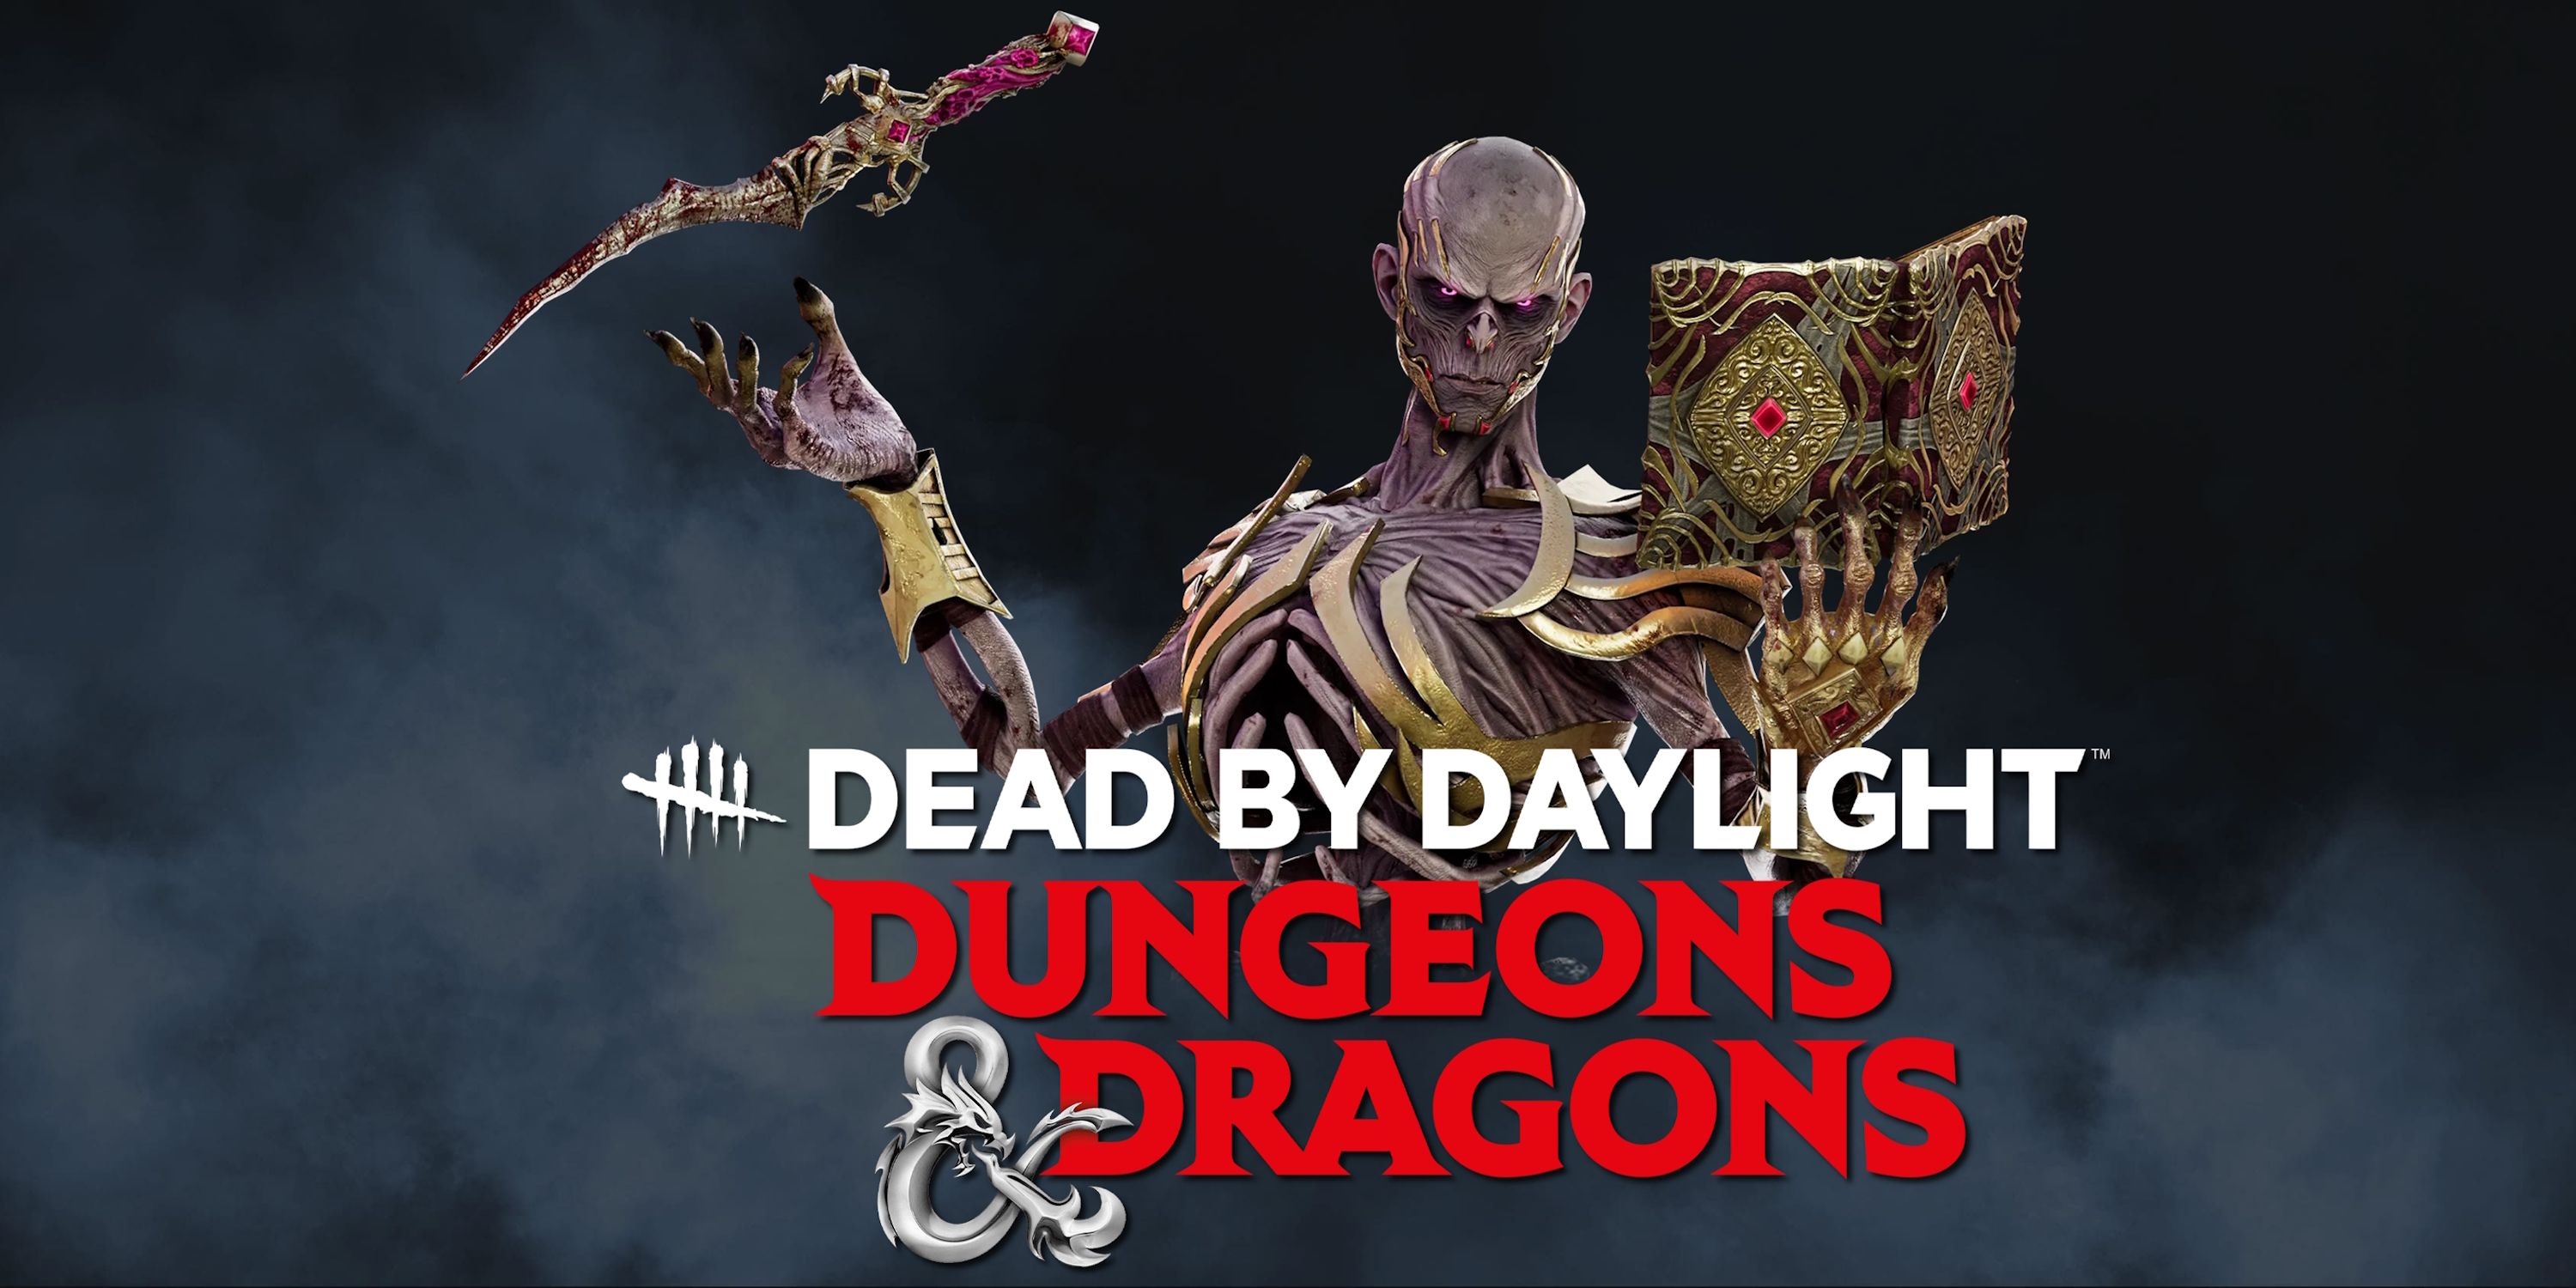 dead by daylight dungeons & dragons logo the lich fog background